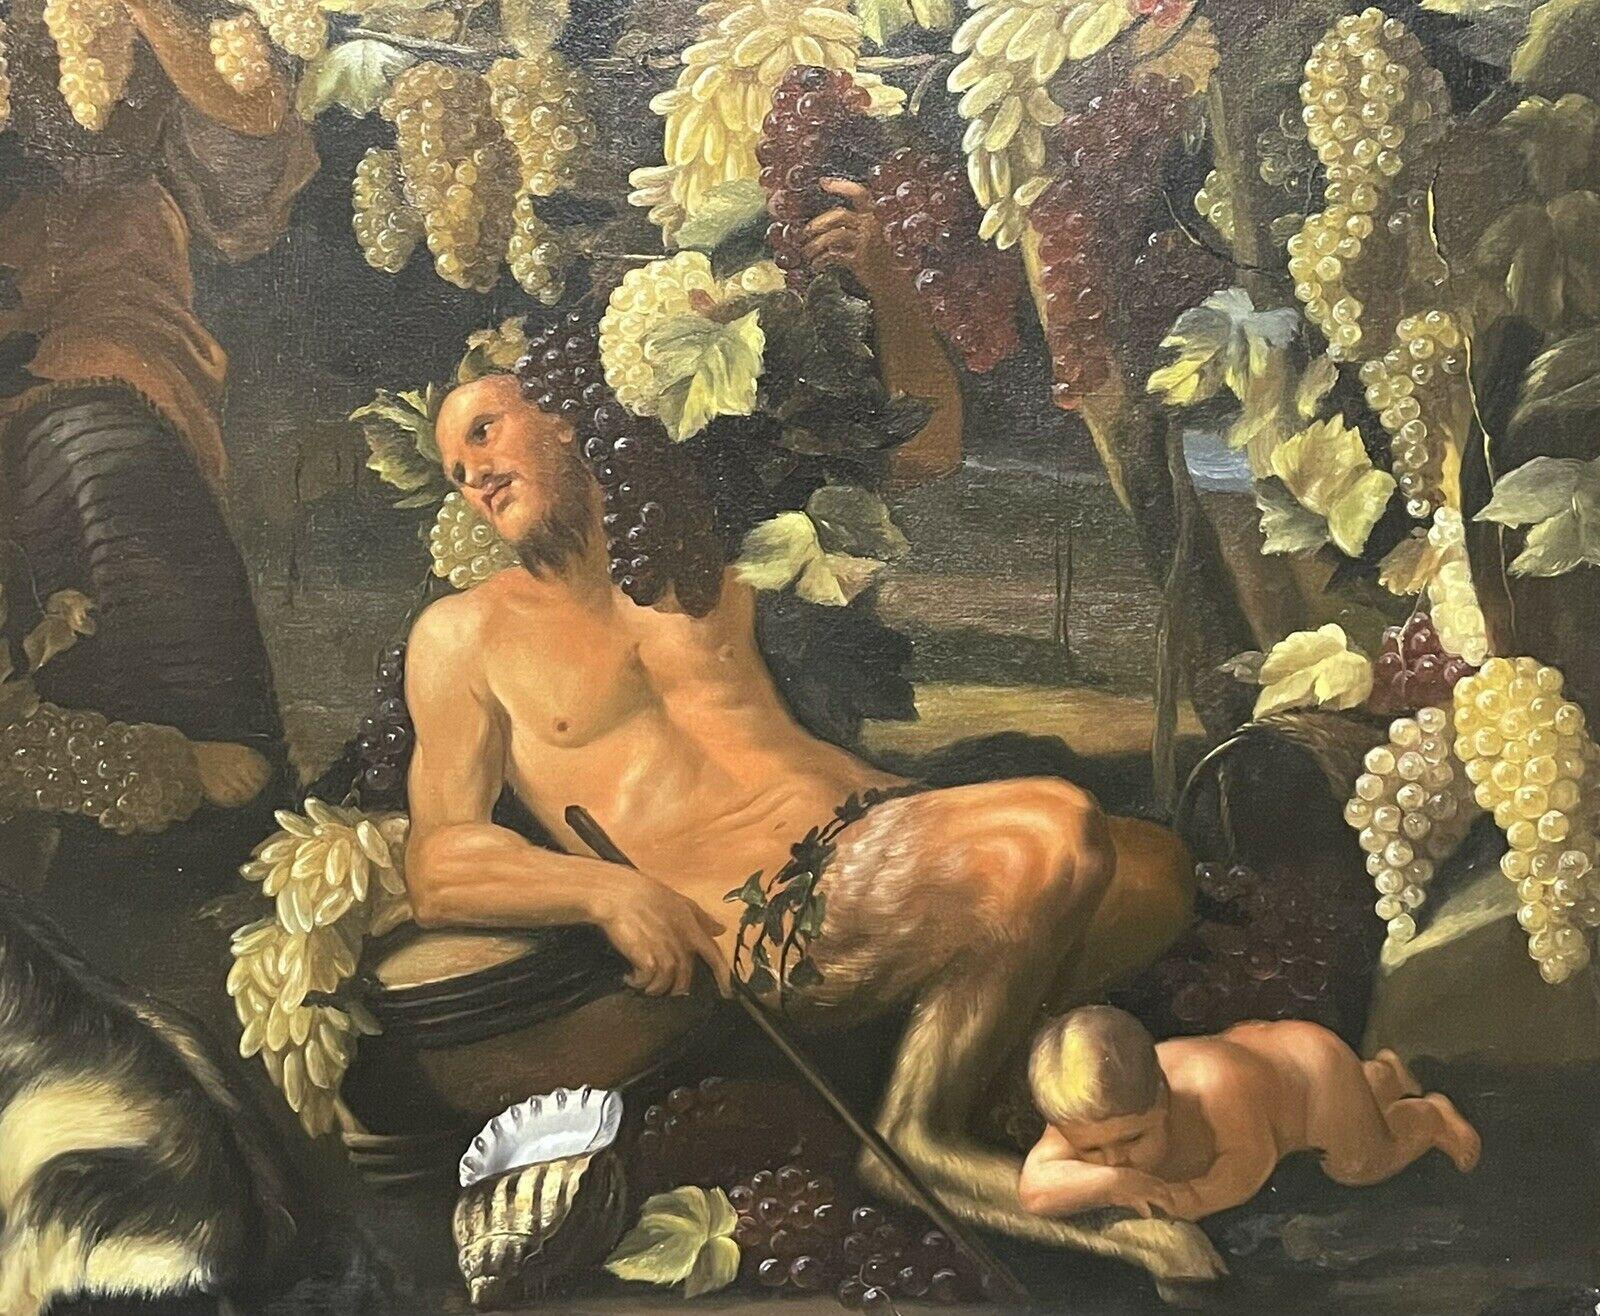 HUGE CLASSICAL OIL PAINTING - BACCHUS FESTIVAL GRAPE HARVEST - MYTHOLOGICAL - Old Masters Painting by Unknown